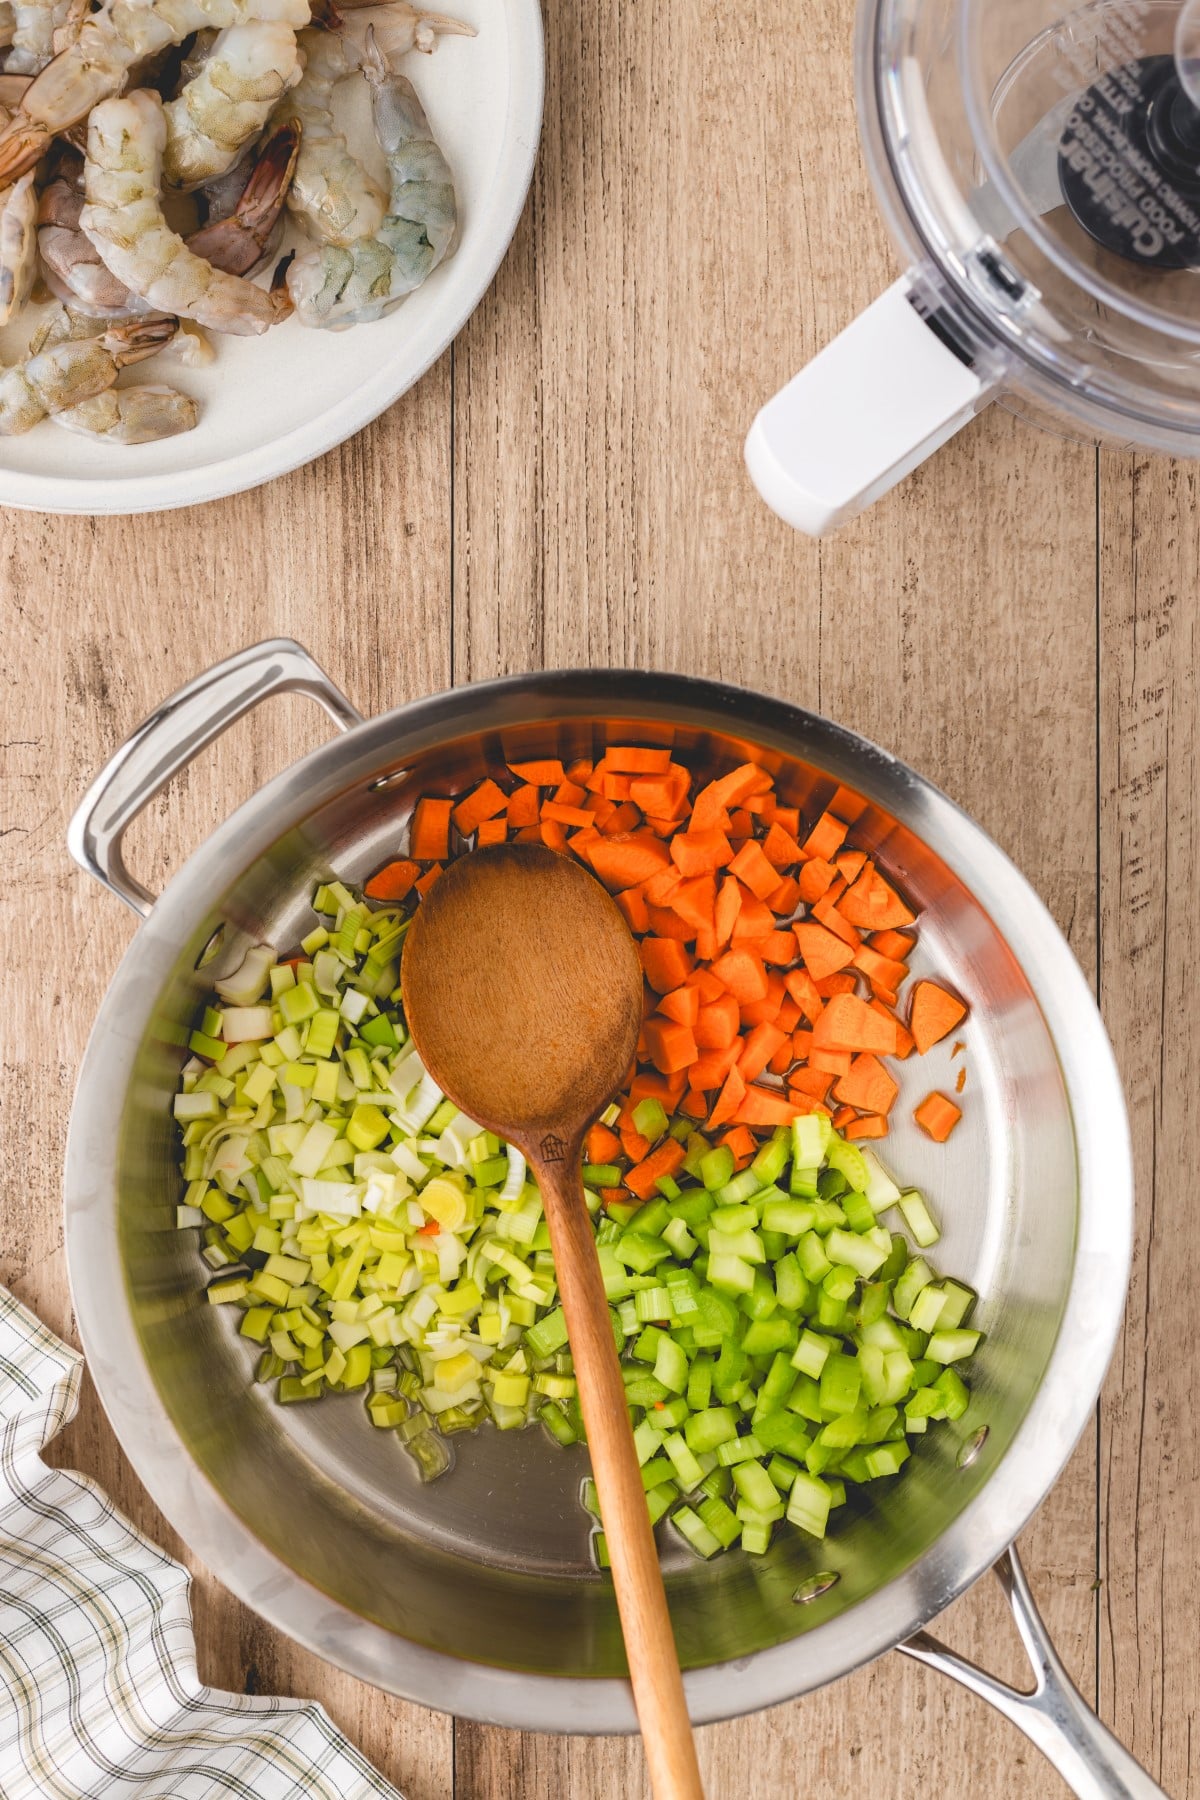 Vegetables chopped up in a pot ready to cook. 